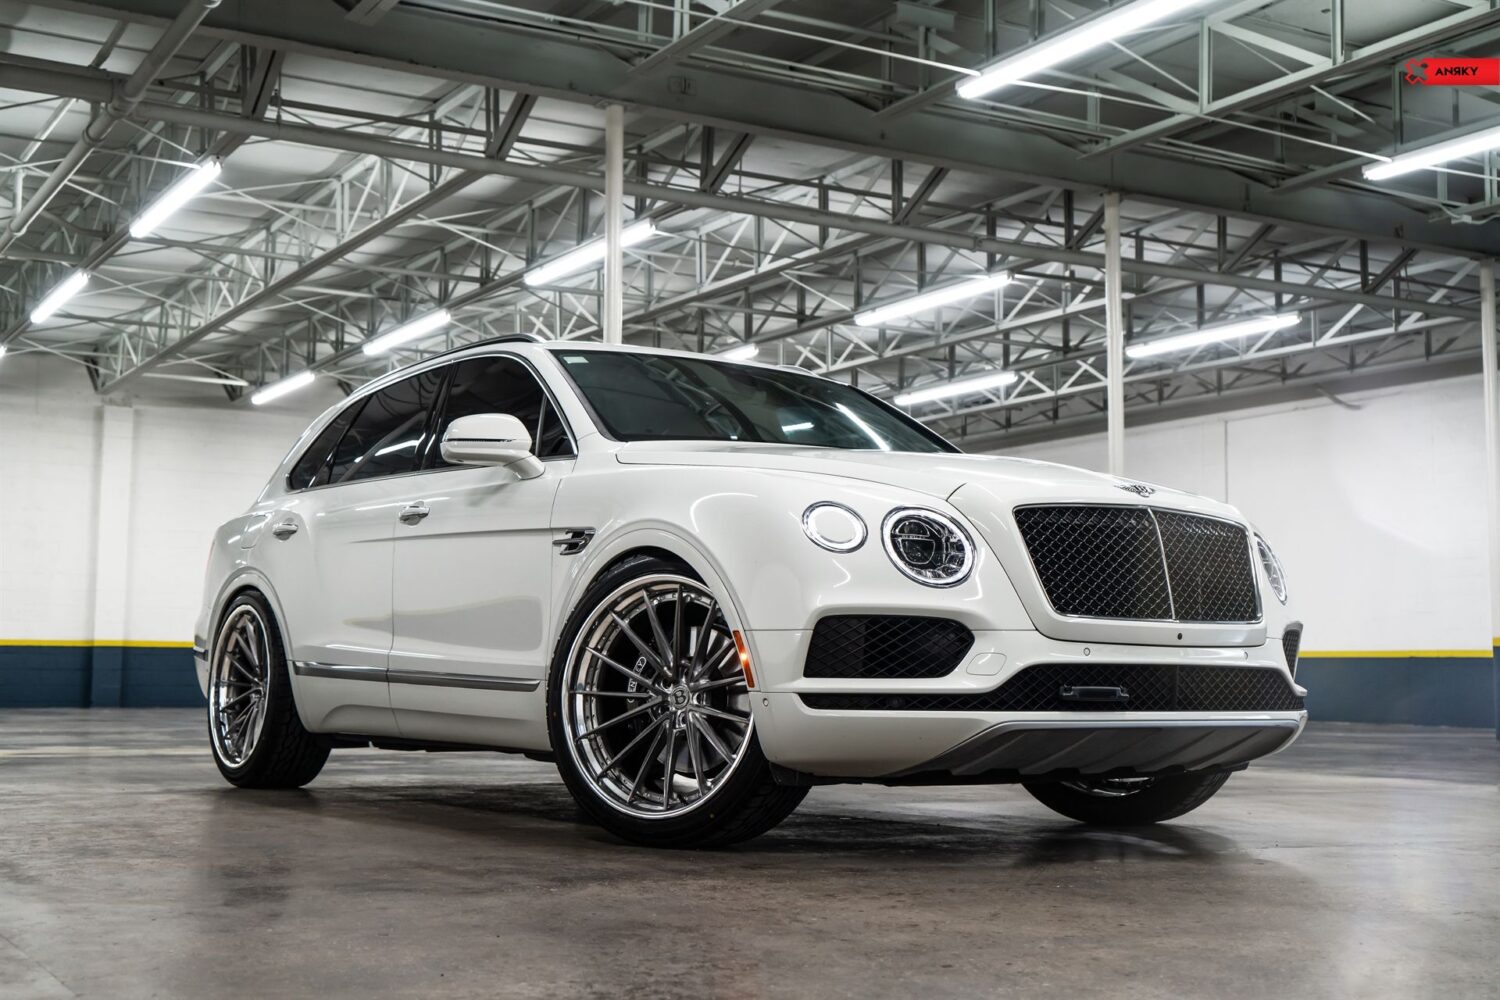 Bentley Bentayga with 24×10.5-inch ANRKY AN39
